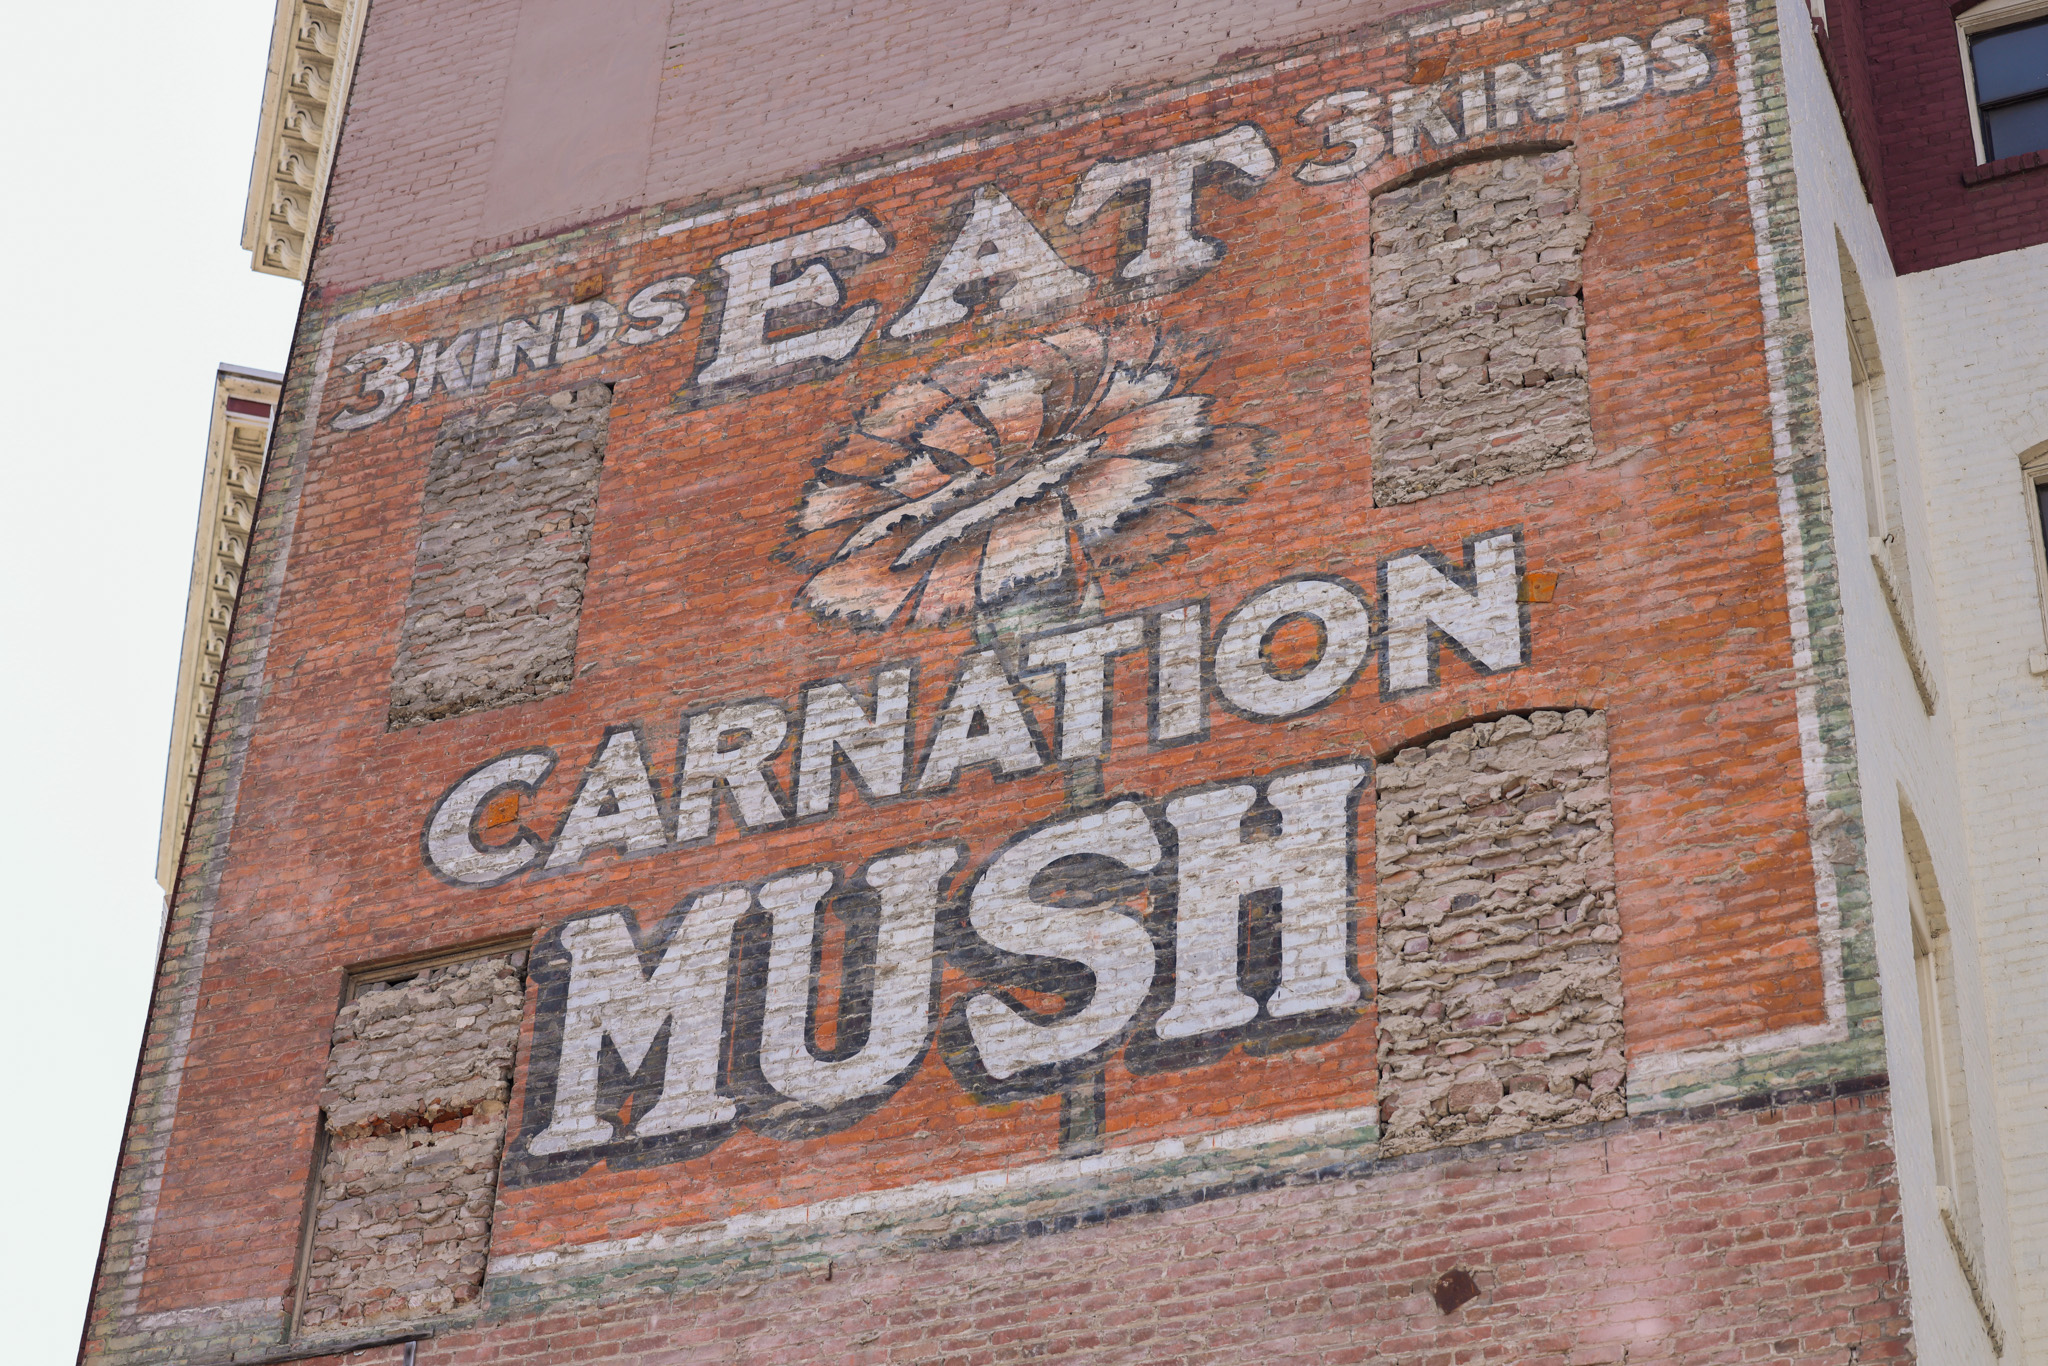 Hiding in Plain Sight, Ghost Signs Offer Glimpse Into San Francisco’s Past